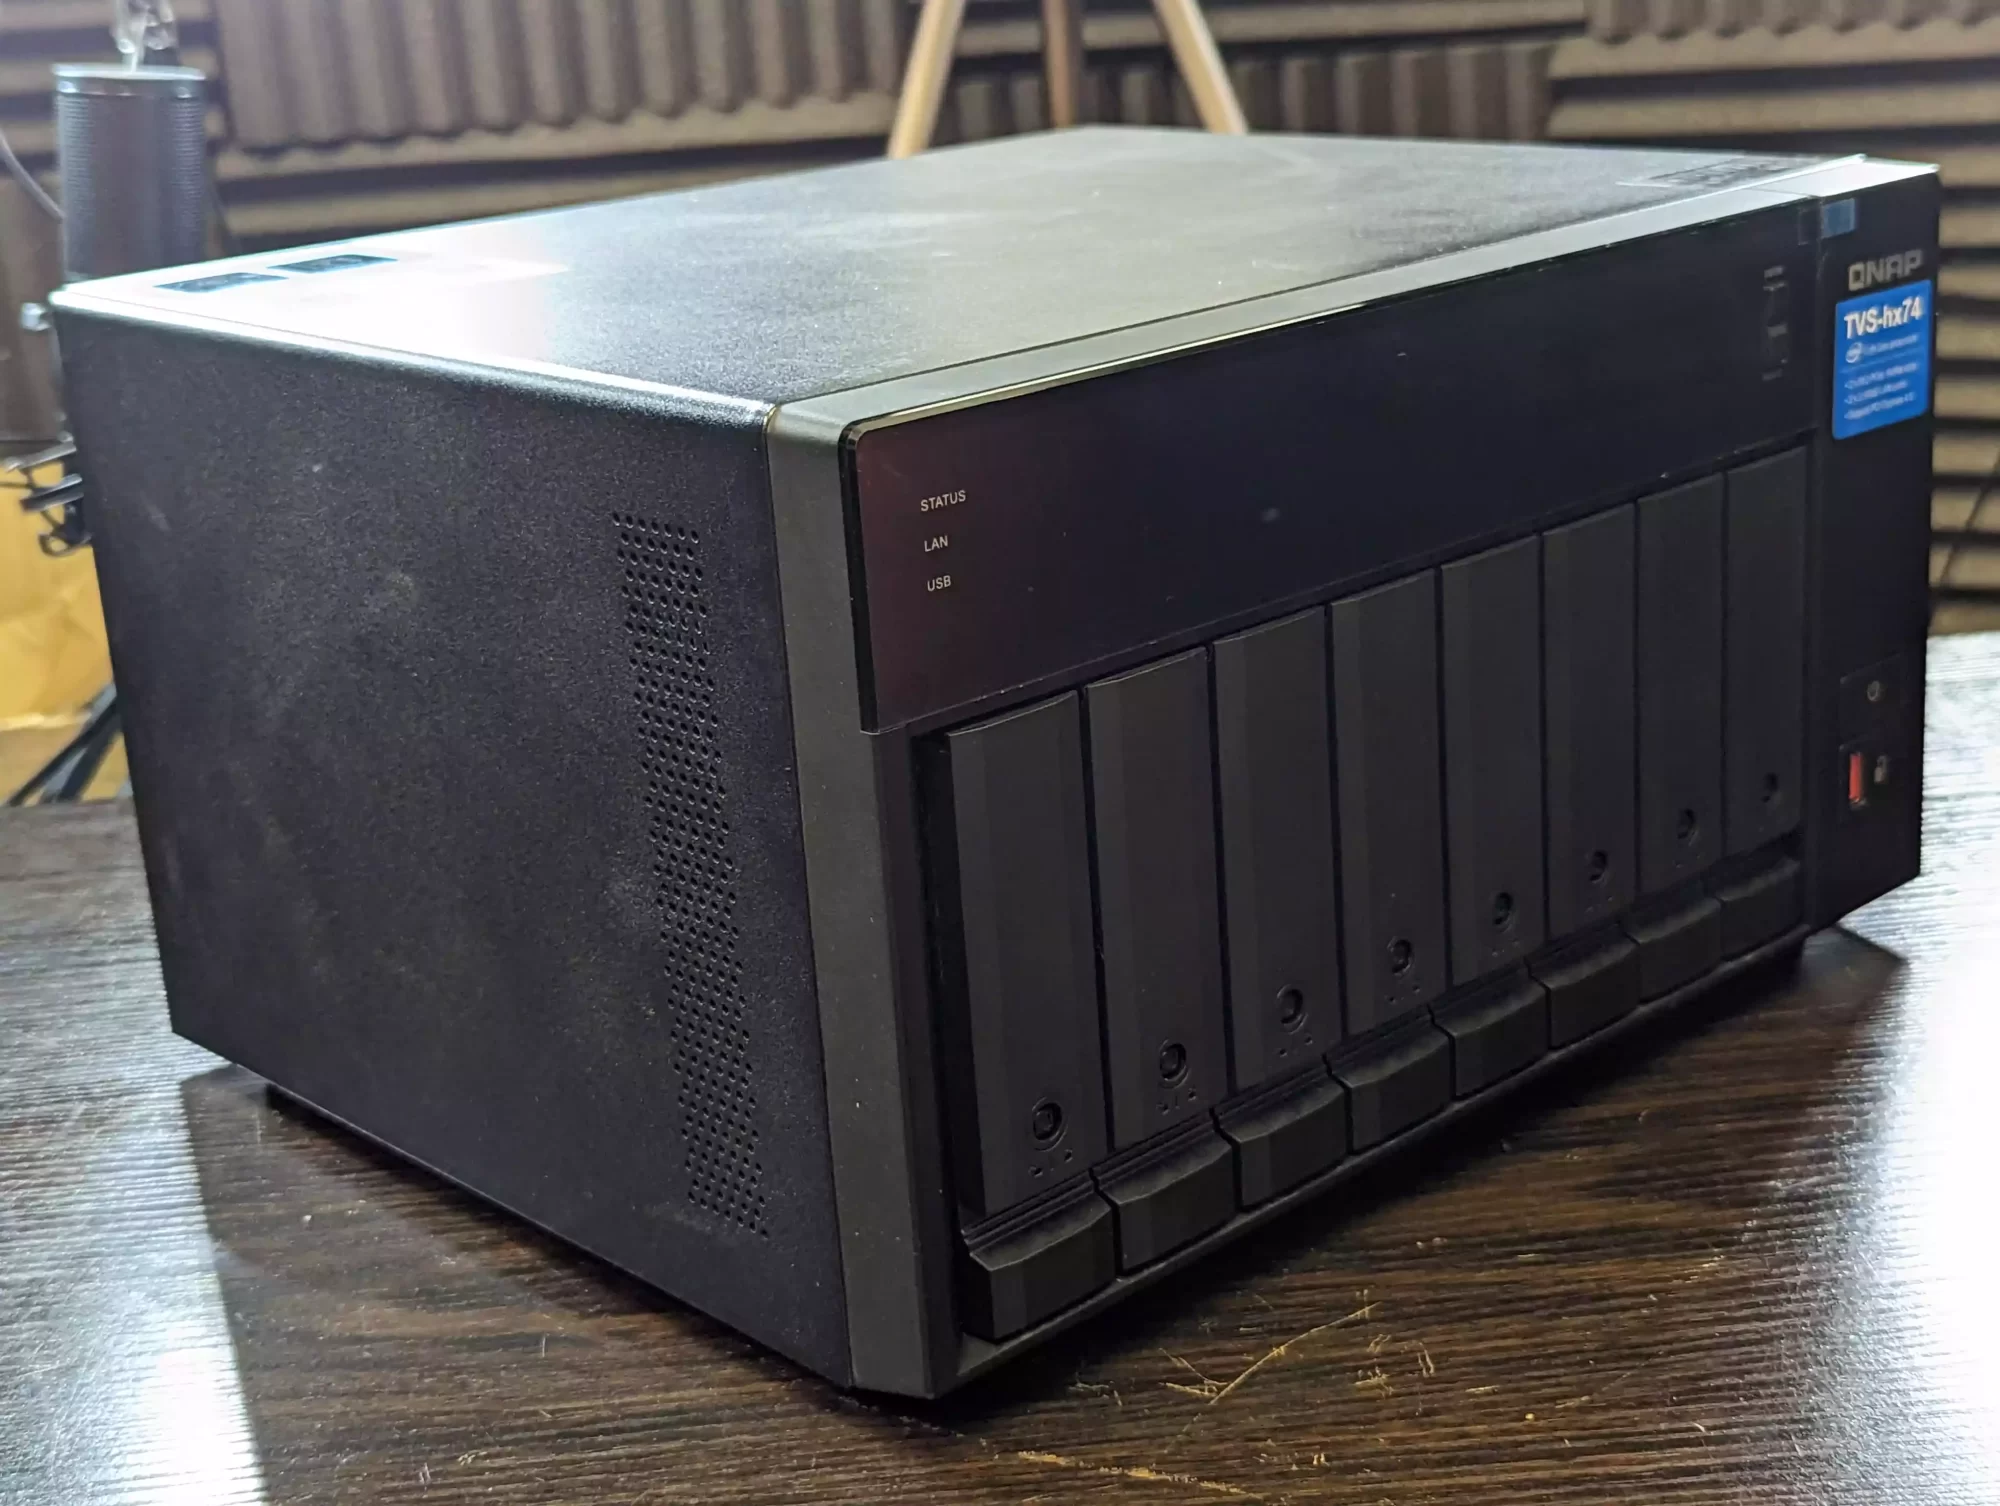 QNAP TVS-h874 Review - Not just a normal 8-bay NAS! – Dutchiee